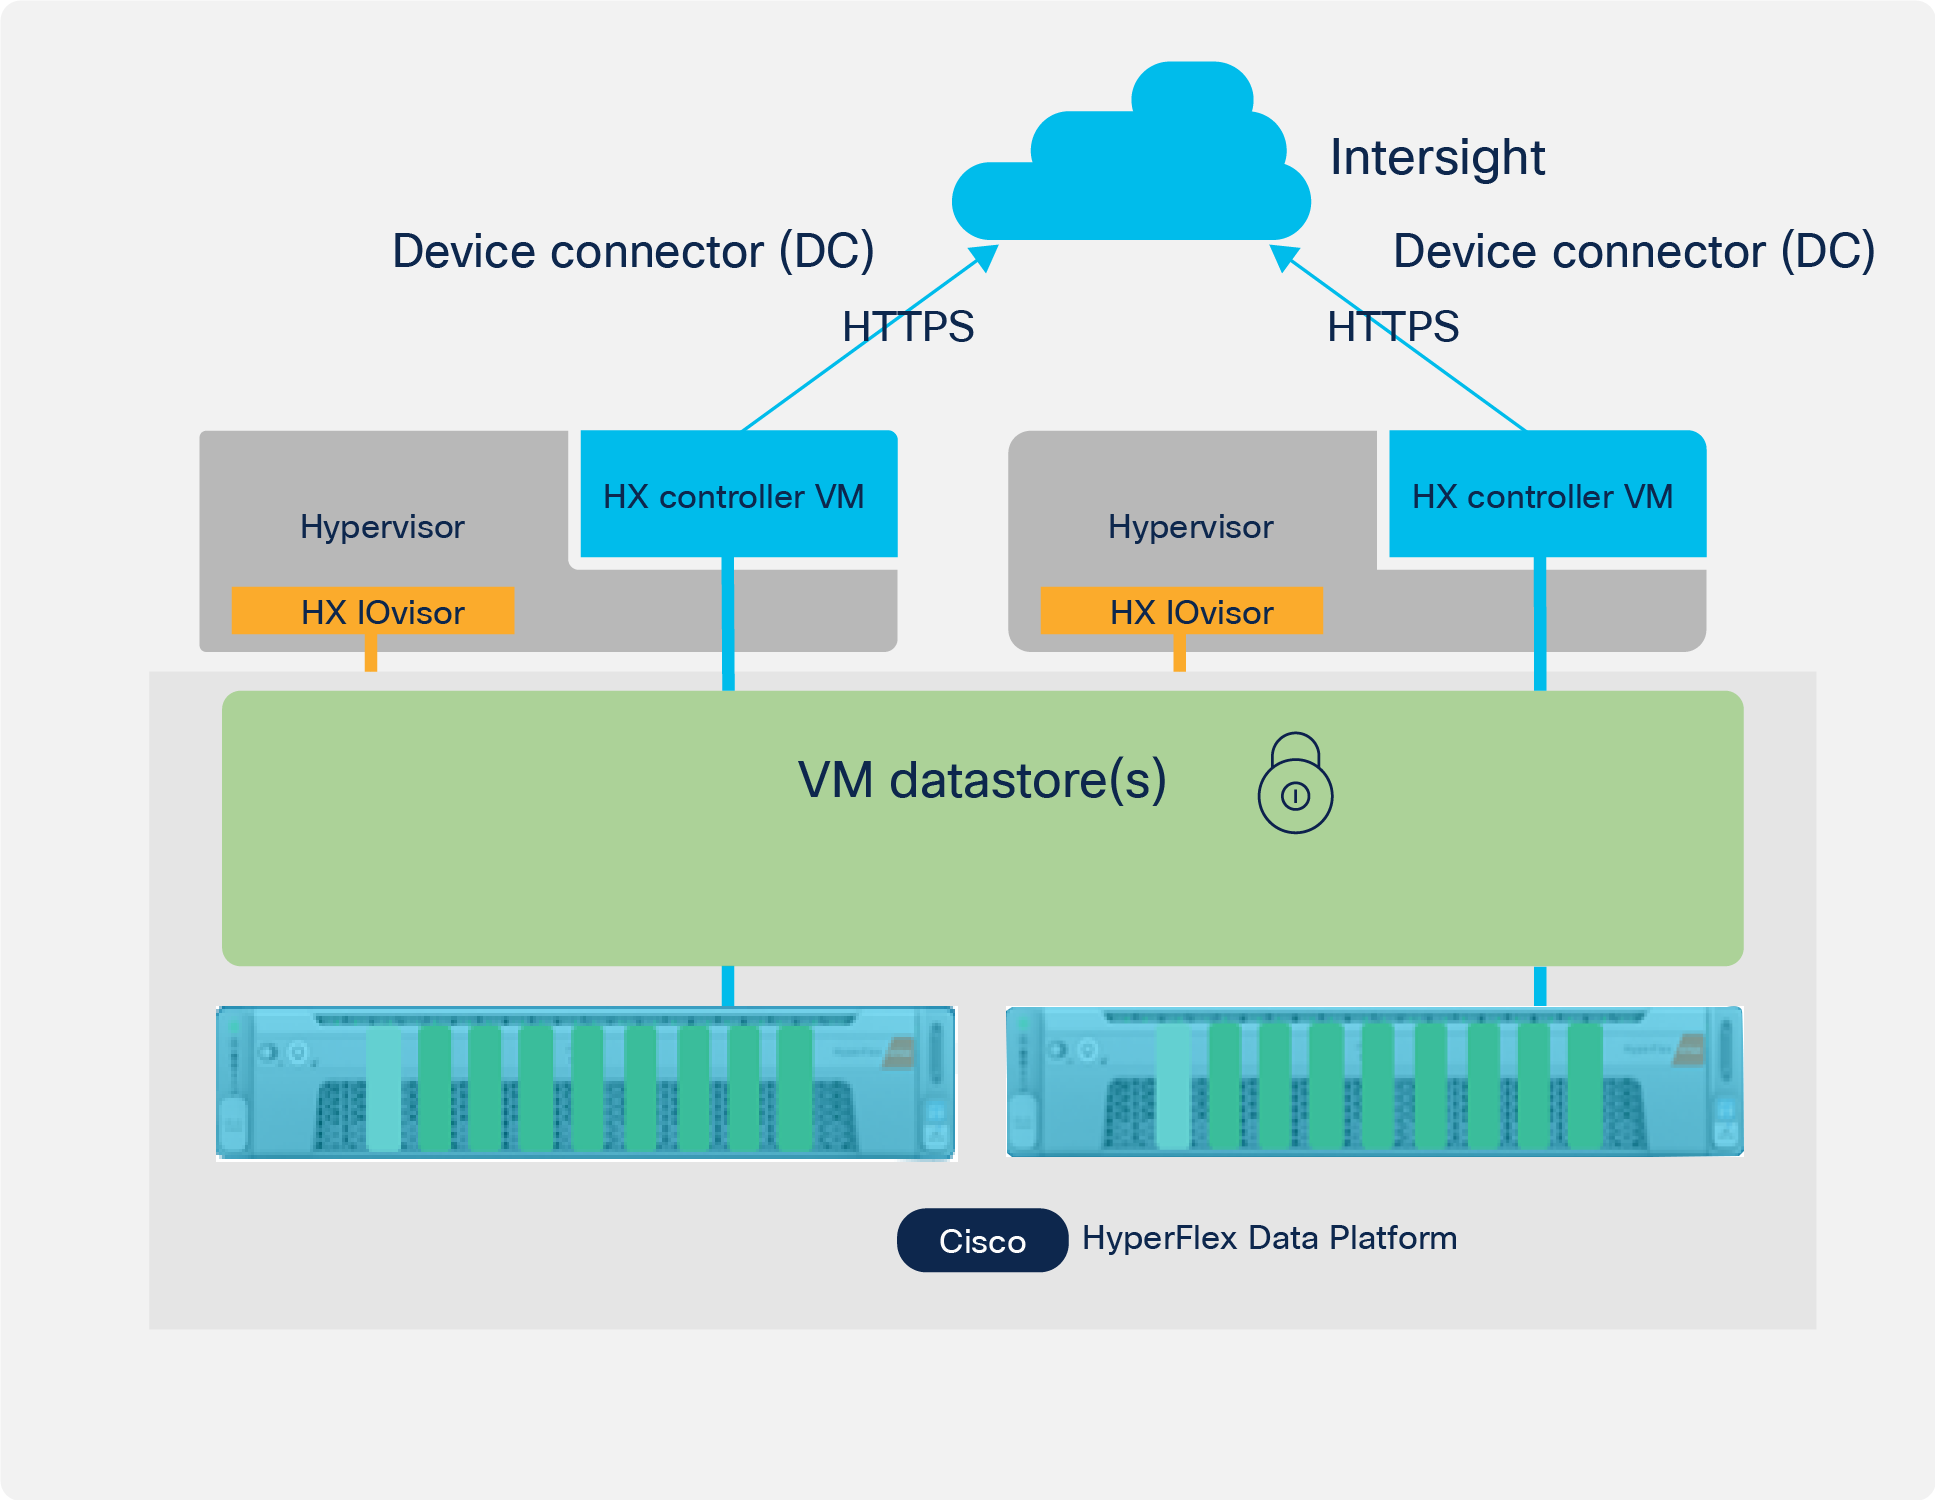 Secure key exchange with Intersight and 2-node edge cluster through the device connector